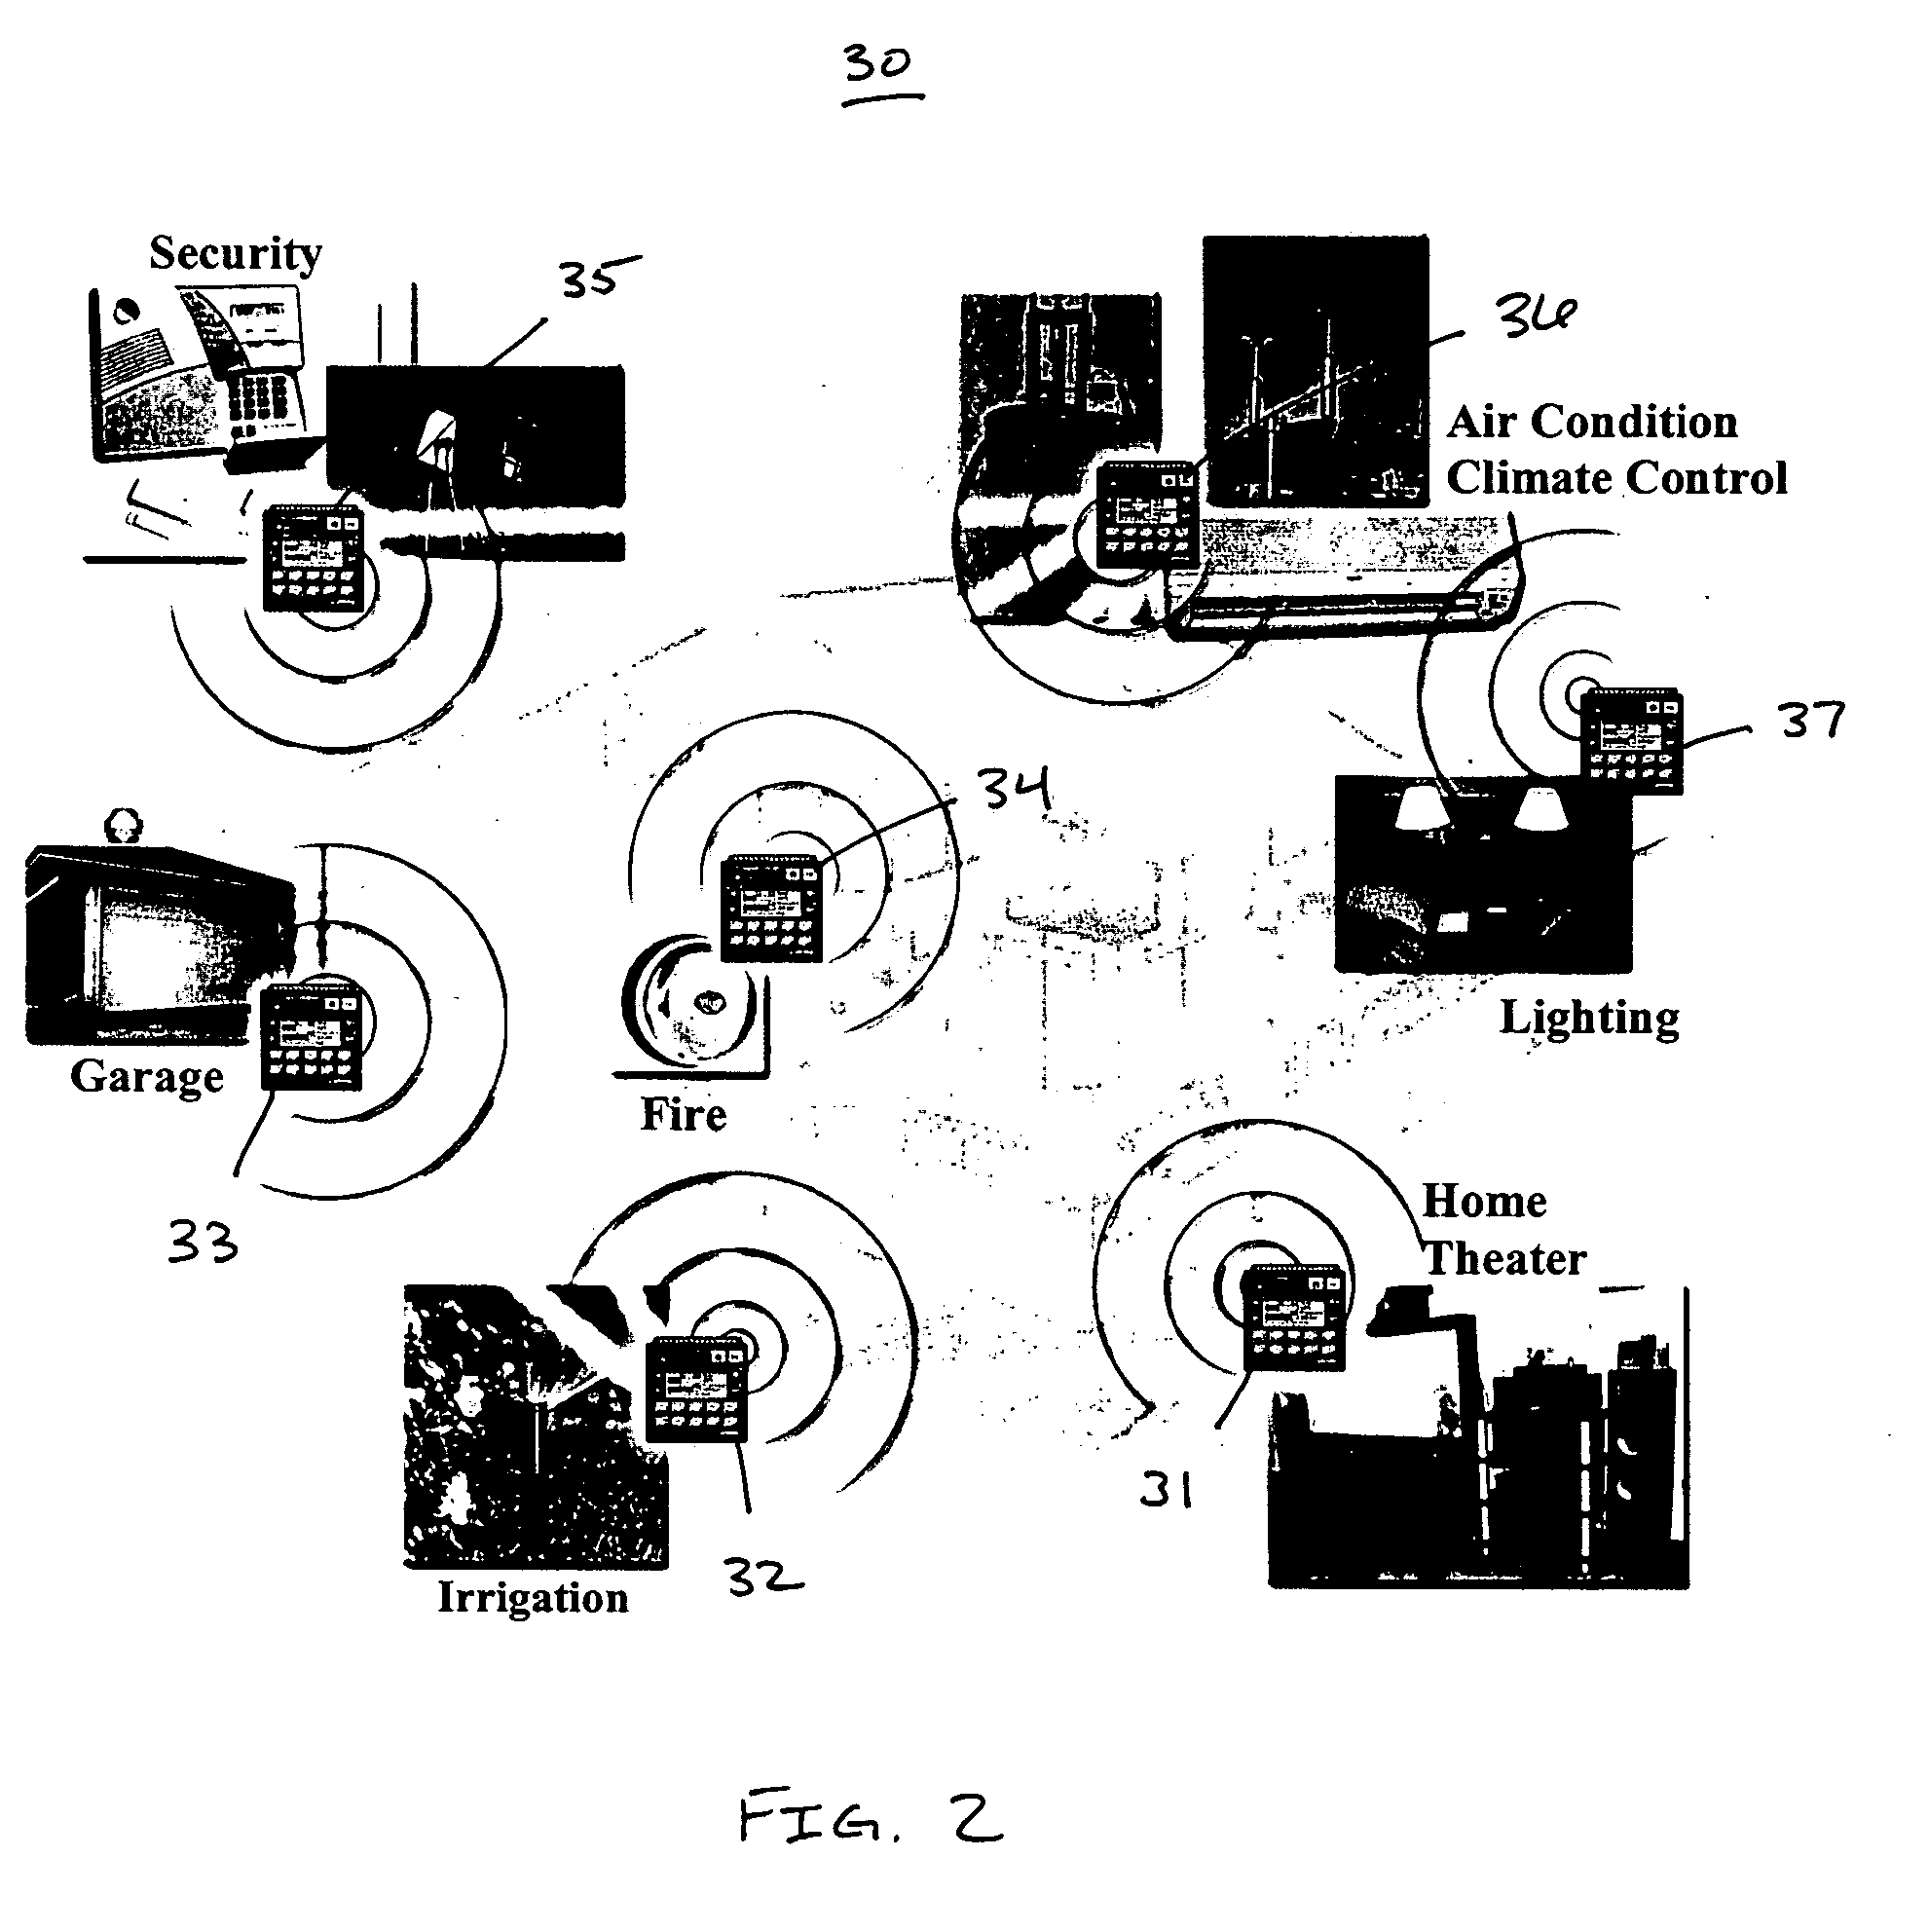 System and method for implementing logic control in programmable controllers in distributed control systems